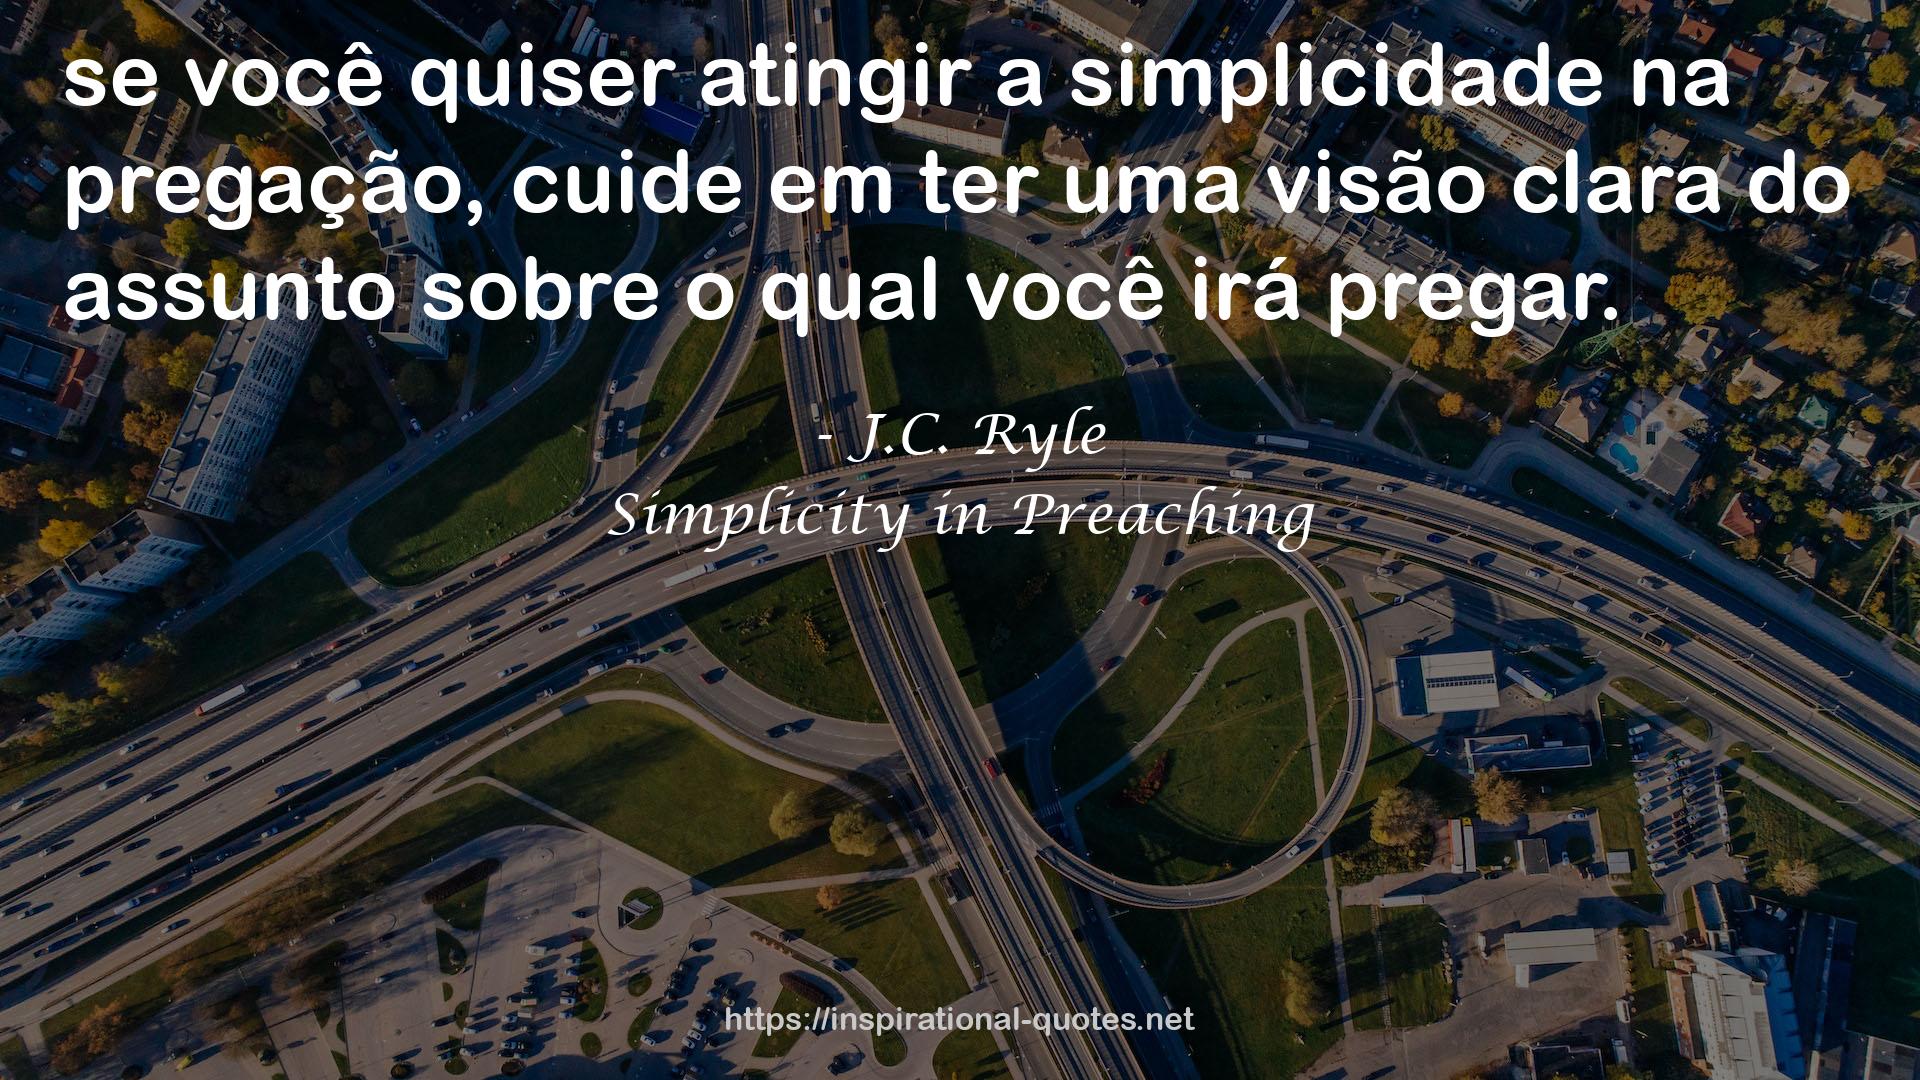 Simplicity in Preaching QUOTES